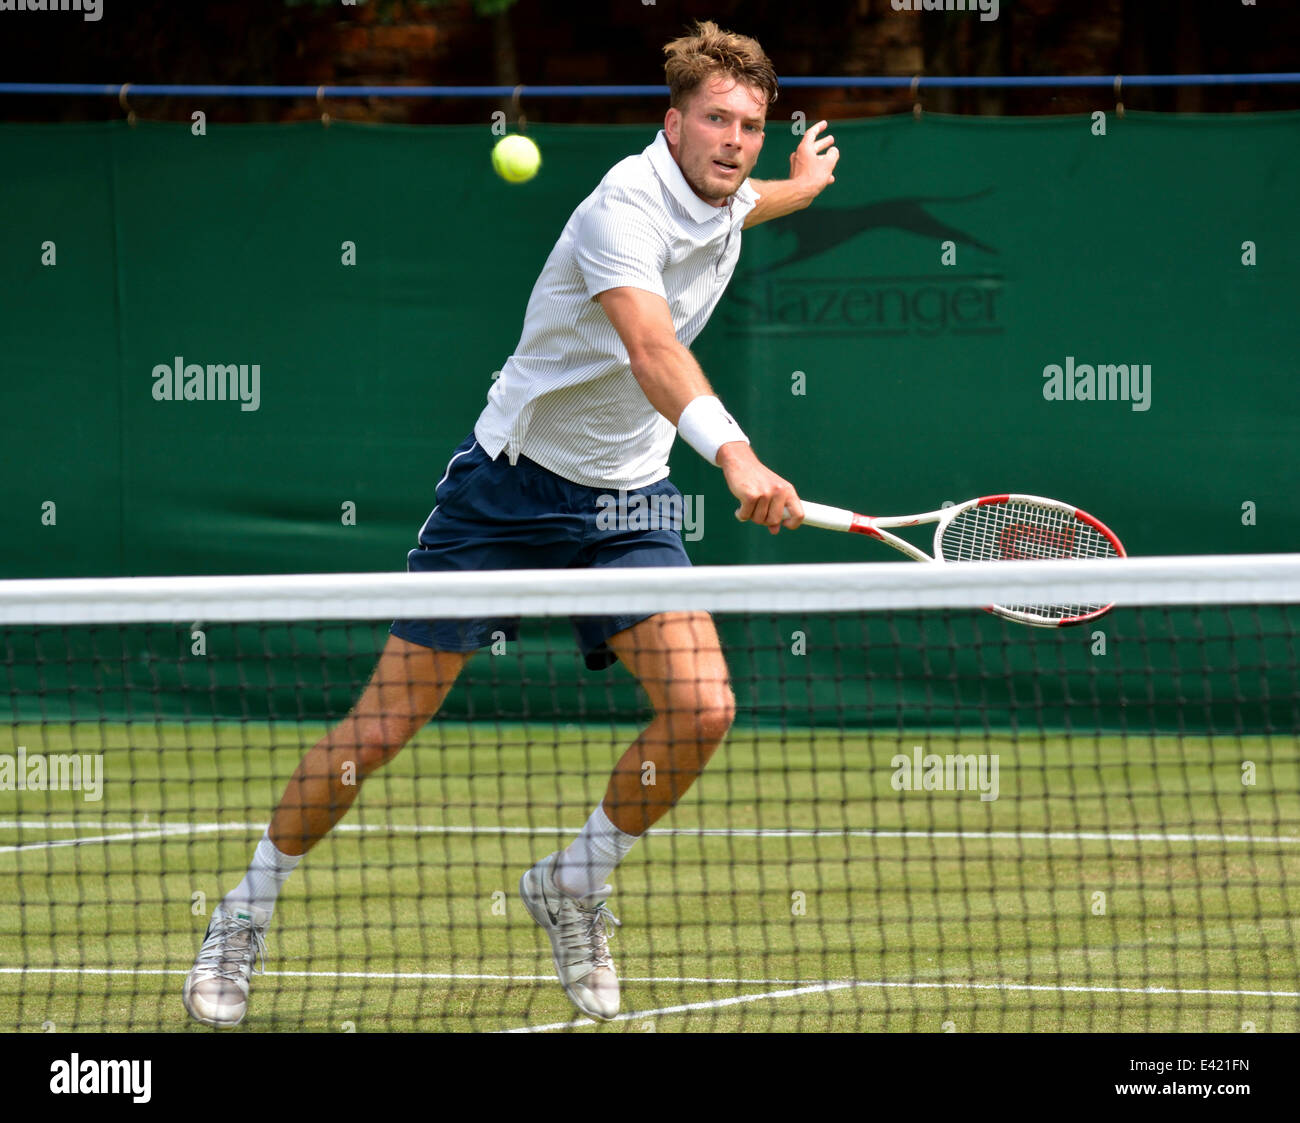 Manchester, UK. 2nd July, 2014. Lewis Burton plays a backhand return during  his second round defeat by Brydon Klein (Seed 4) 3-6, 6-3, 3-6 at the Aegon  GB Pro Tennis Tournament at